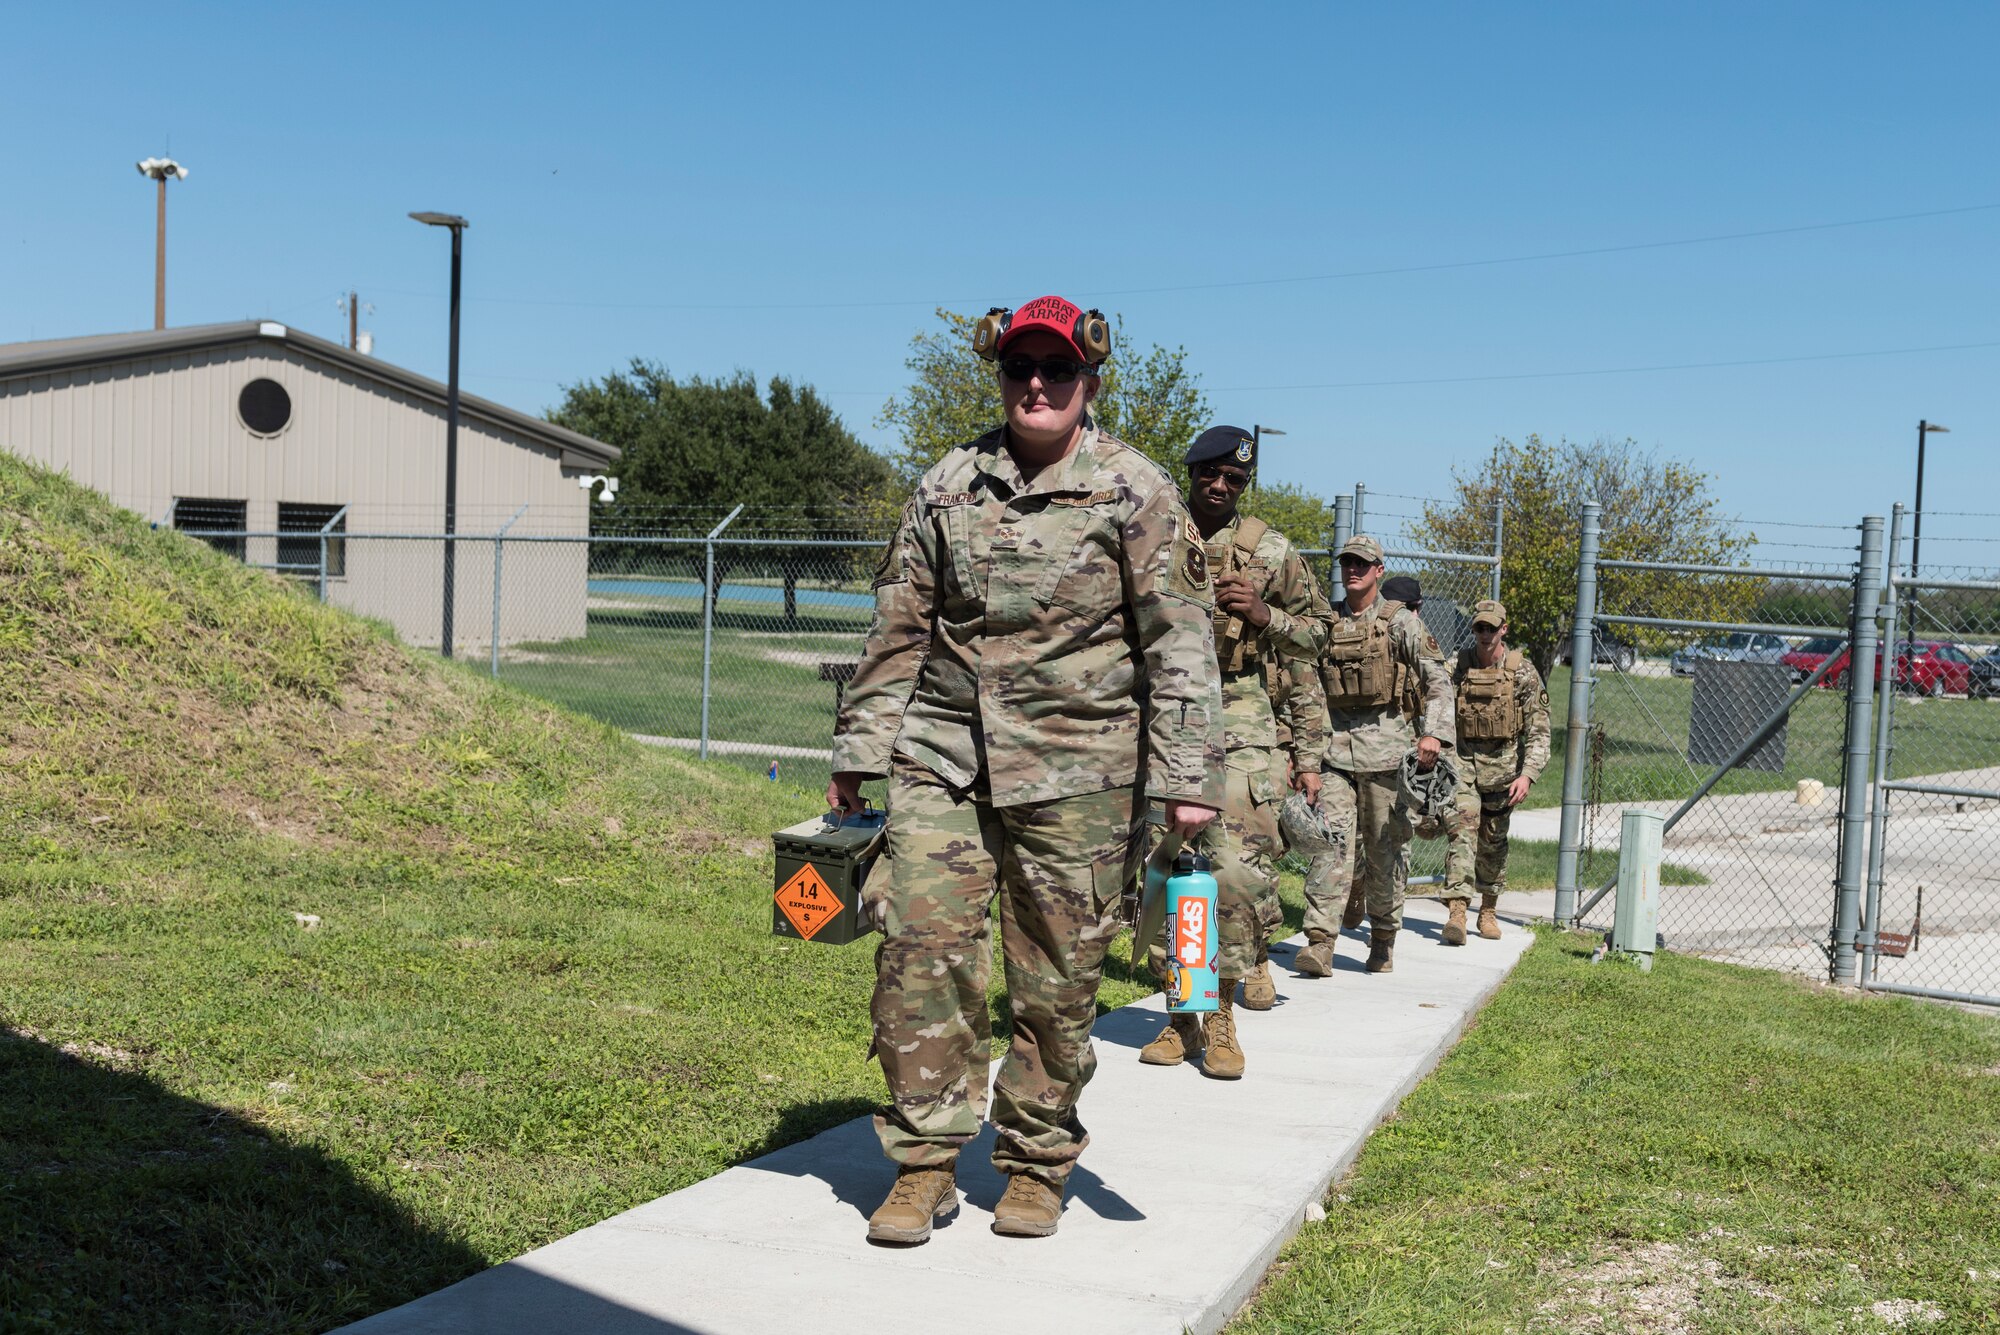 Senior Airman Lindsay Francher, 47th Security Forces Squadron Combat Arms instructor, leads her class to the range, Oct. 1, 2020, at Laughlin Air Force Base, Texas. She believes no matter how much weapons experience one has, they should go into training with an open mind and a ready ear. Those who do not, tend not to improve at the rate as the students with a humble attitude. (U.S. Air Force photo by Senior Airman Anne McCready)